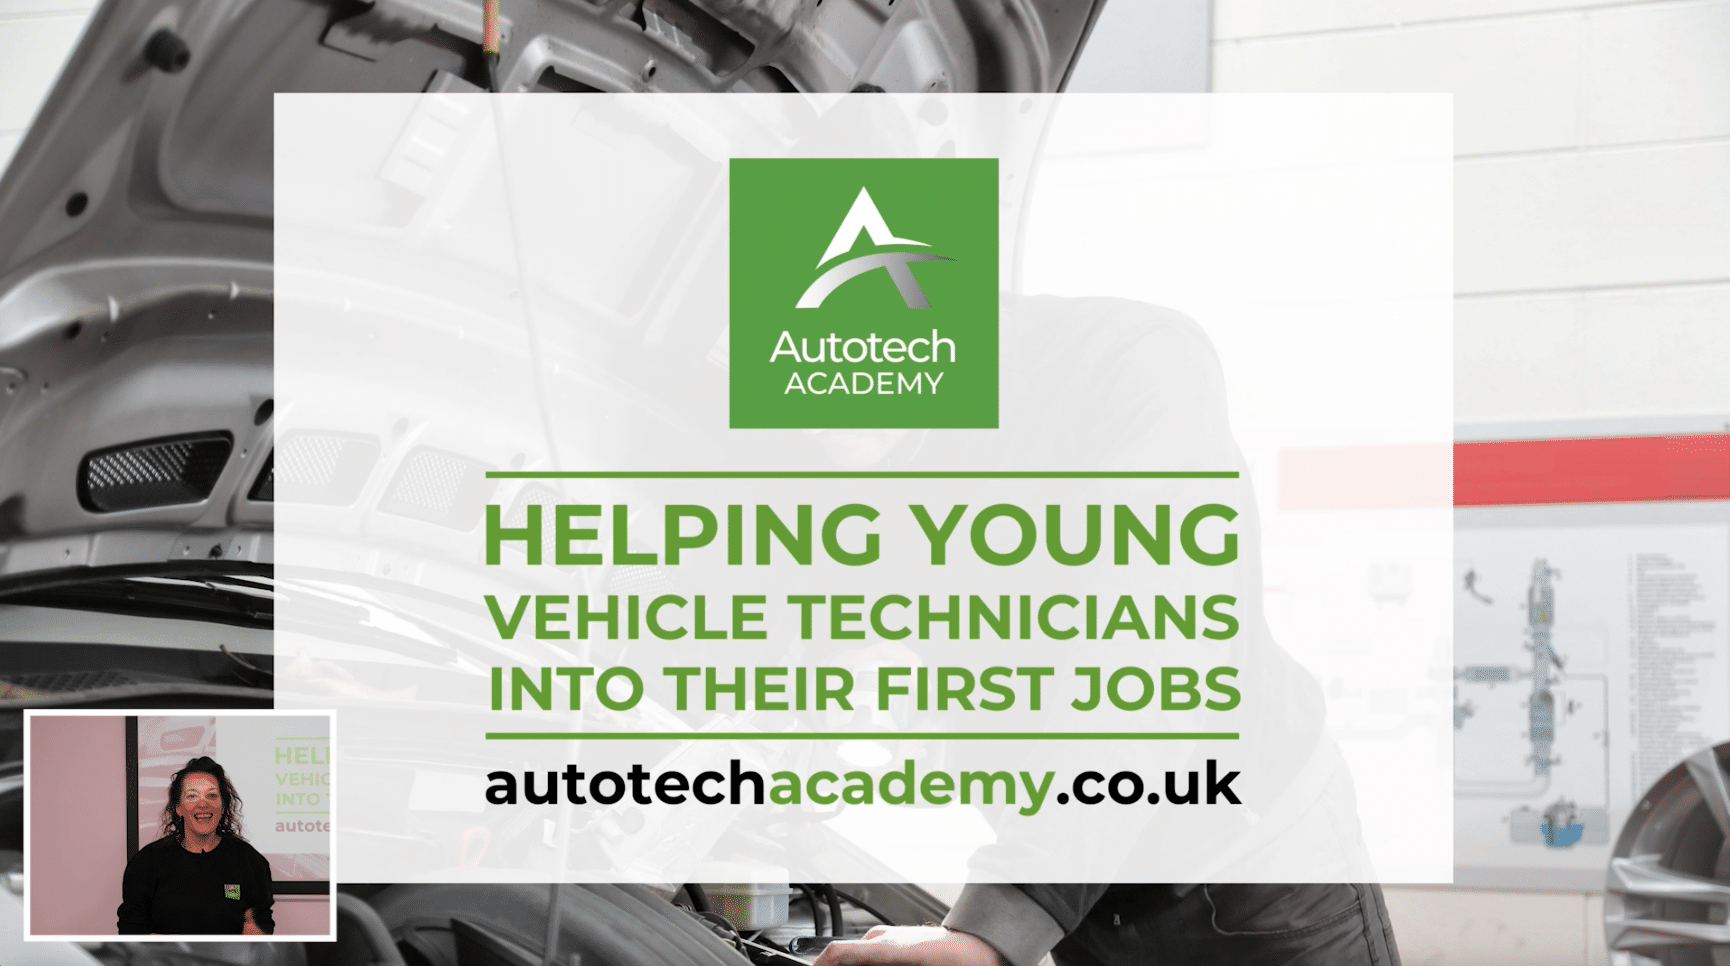 Image used as a video thumbnail showing the Autotech Academy logo with some text saying Helping Young Vehicle Technicians Into Their First Jobs